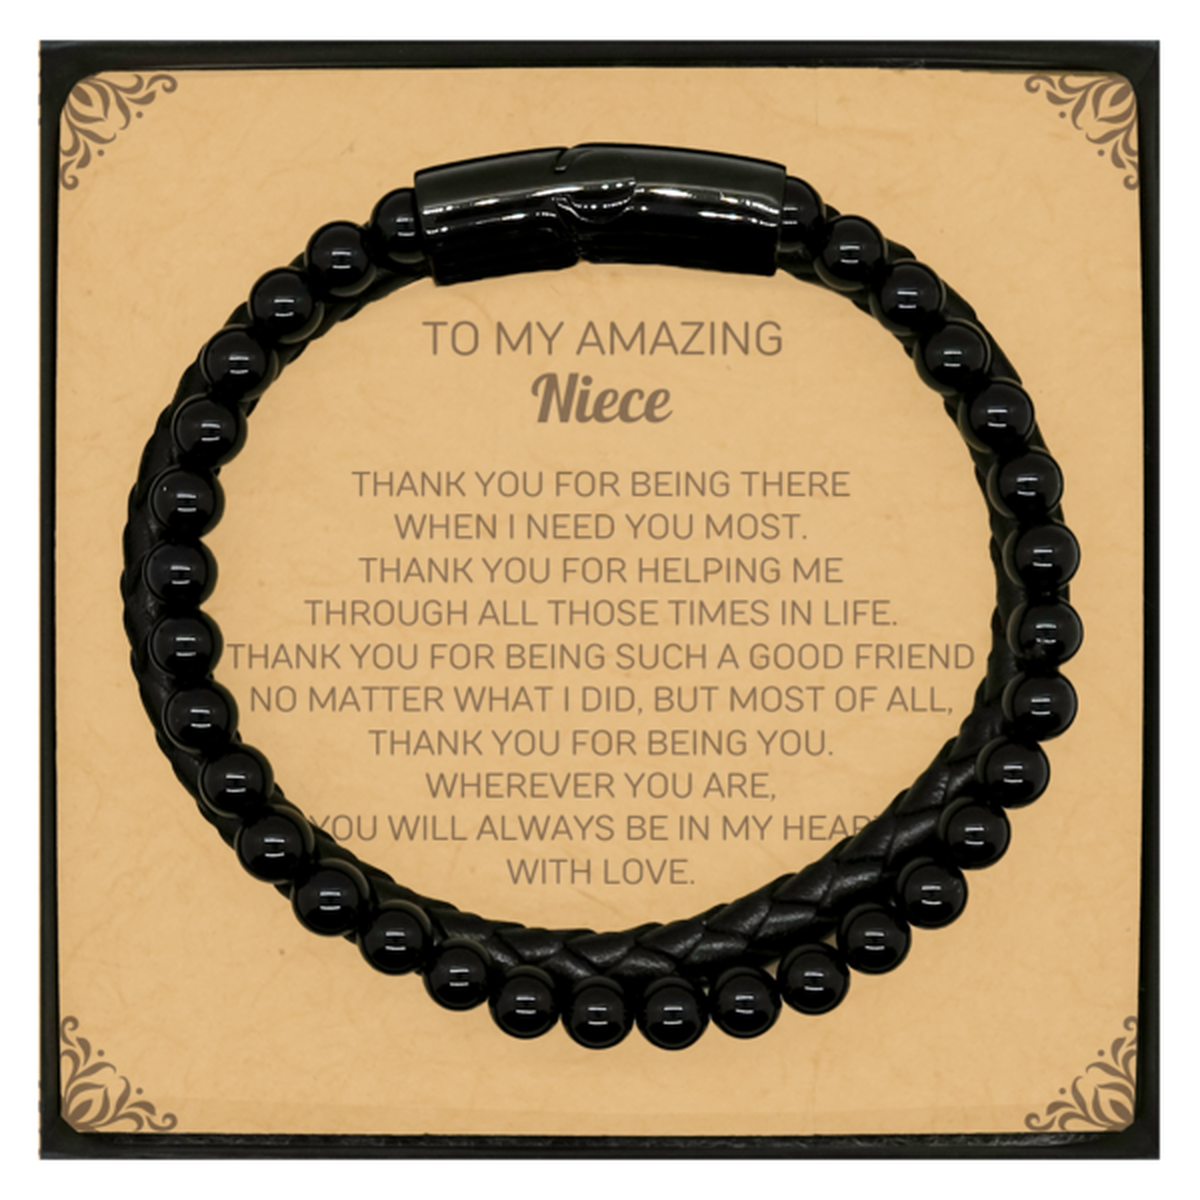 To My Amazing Niece Stone Leather Bracelets, Thank you for being there, Thank You Gifts For Niece, Birthday, Christmas Unique Gifts For Niece